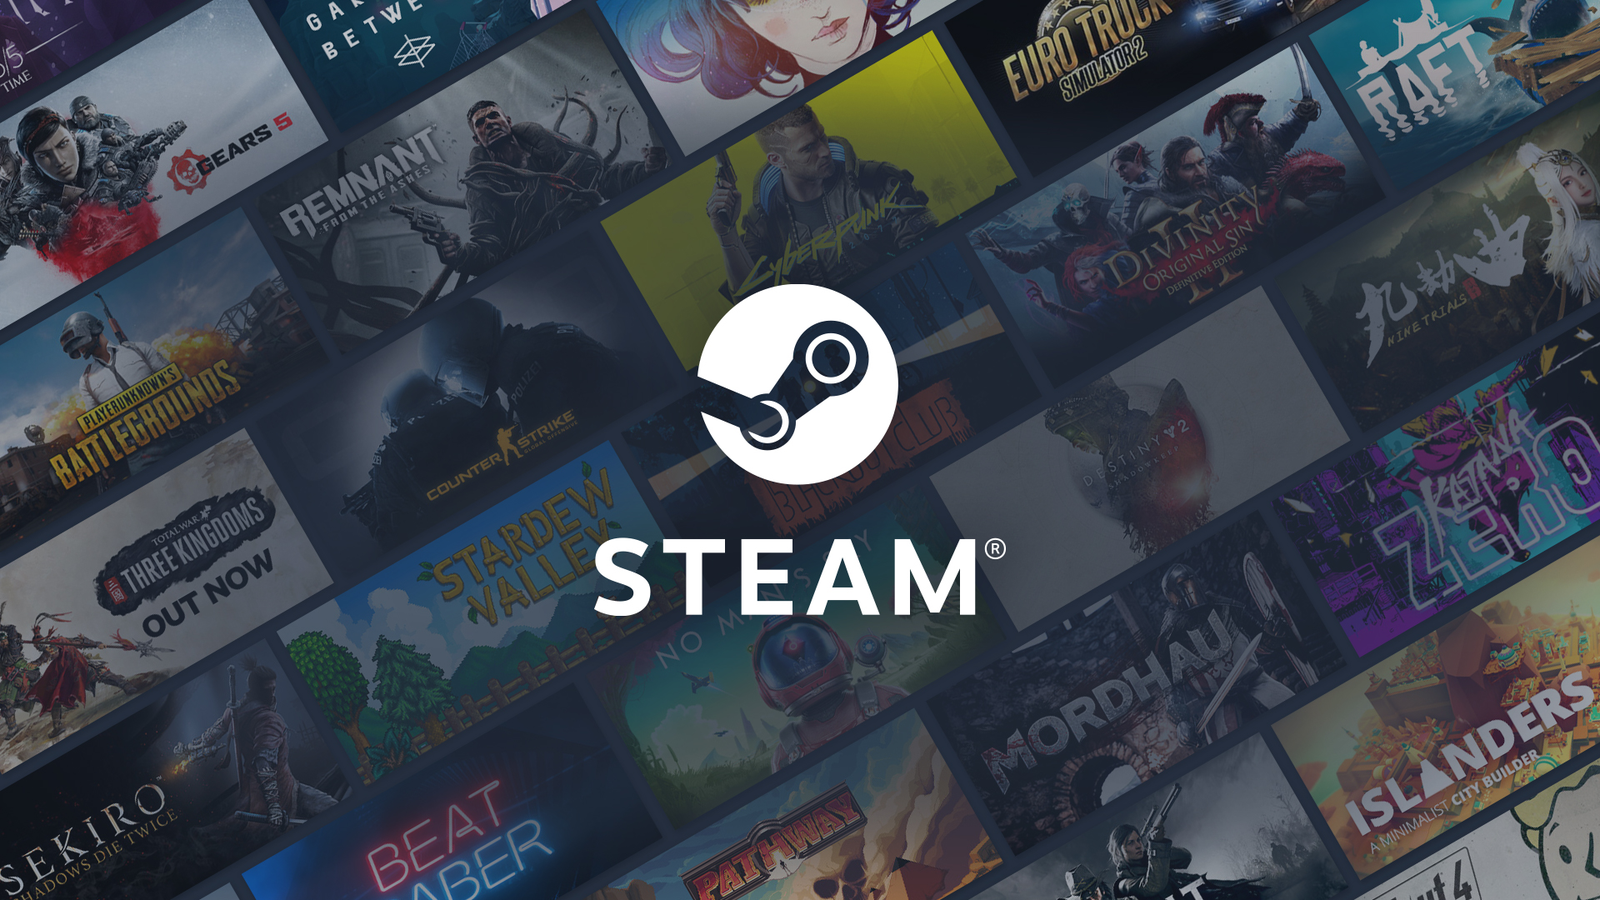 EU court rejects Valve appeal against €1.6 million fine for 'geo-blocking'  Steam games, says policy existed to protect publisher royalties and 'the  margins earned by Valve